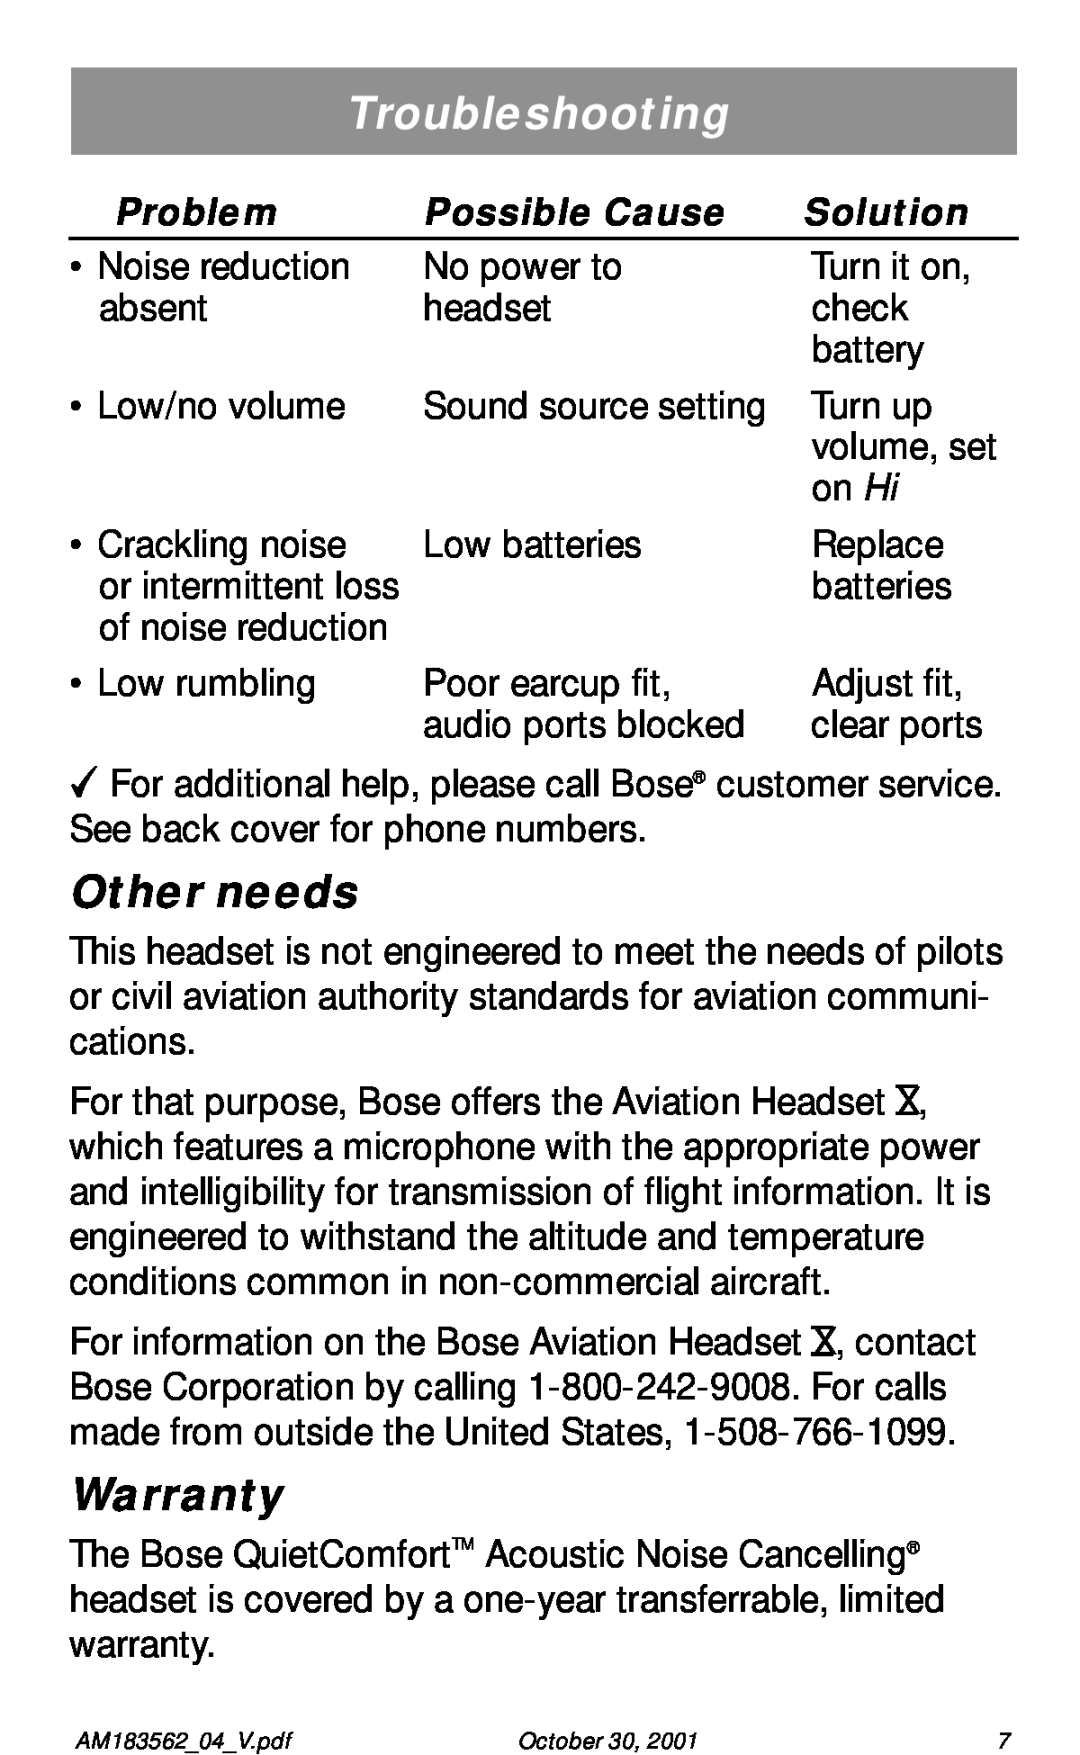 Bose Acoustic Noise Cancelling Headset manual Troubleshooting, Other needs, Warranty, Problem, Possible Cause, Solution 